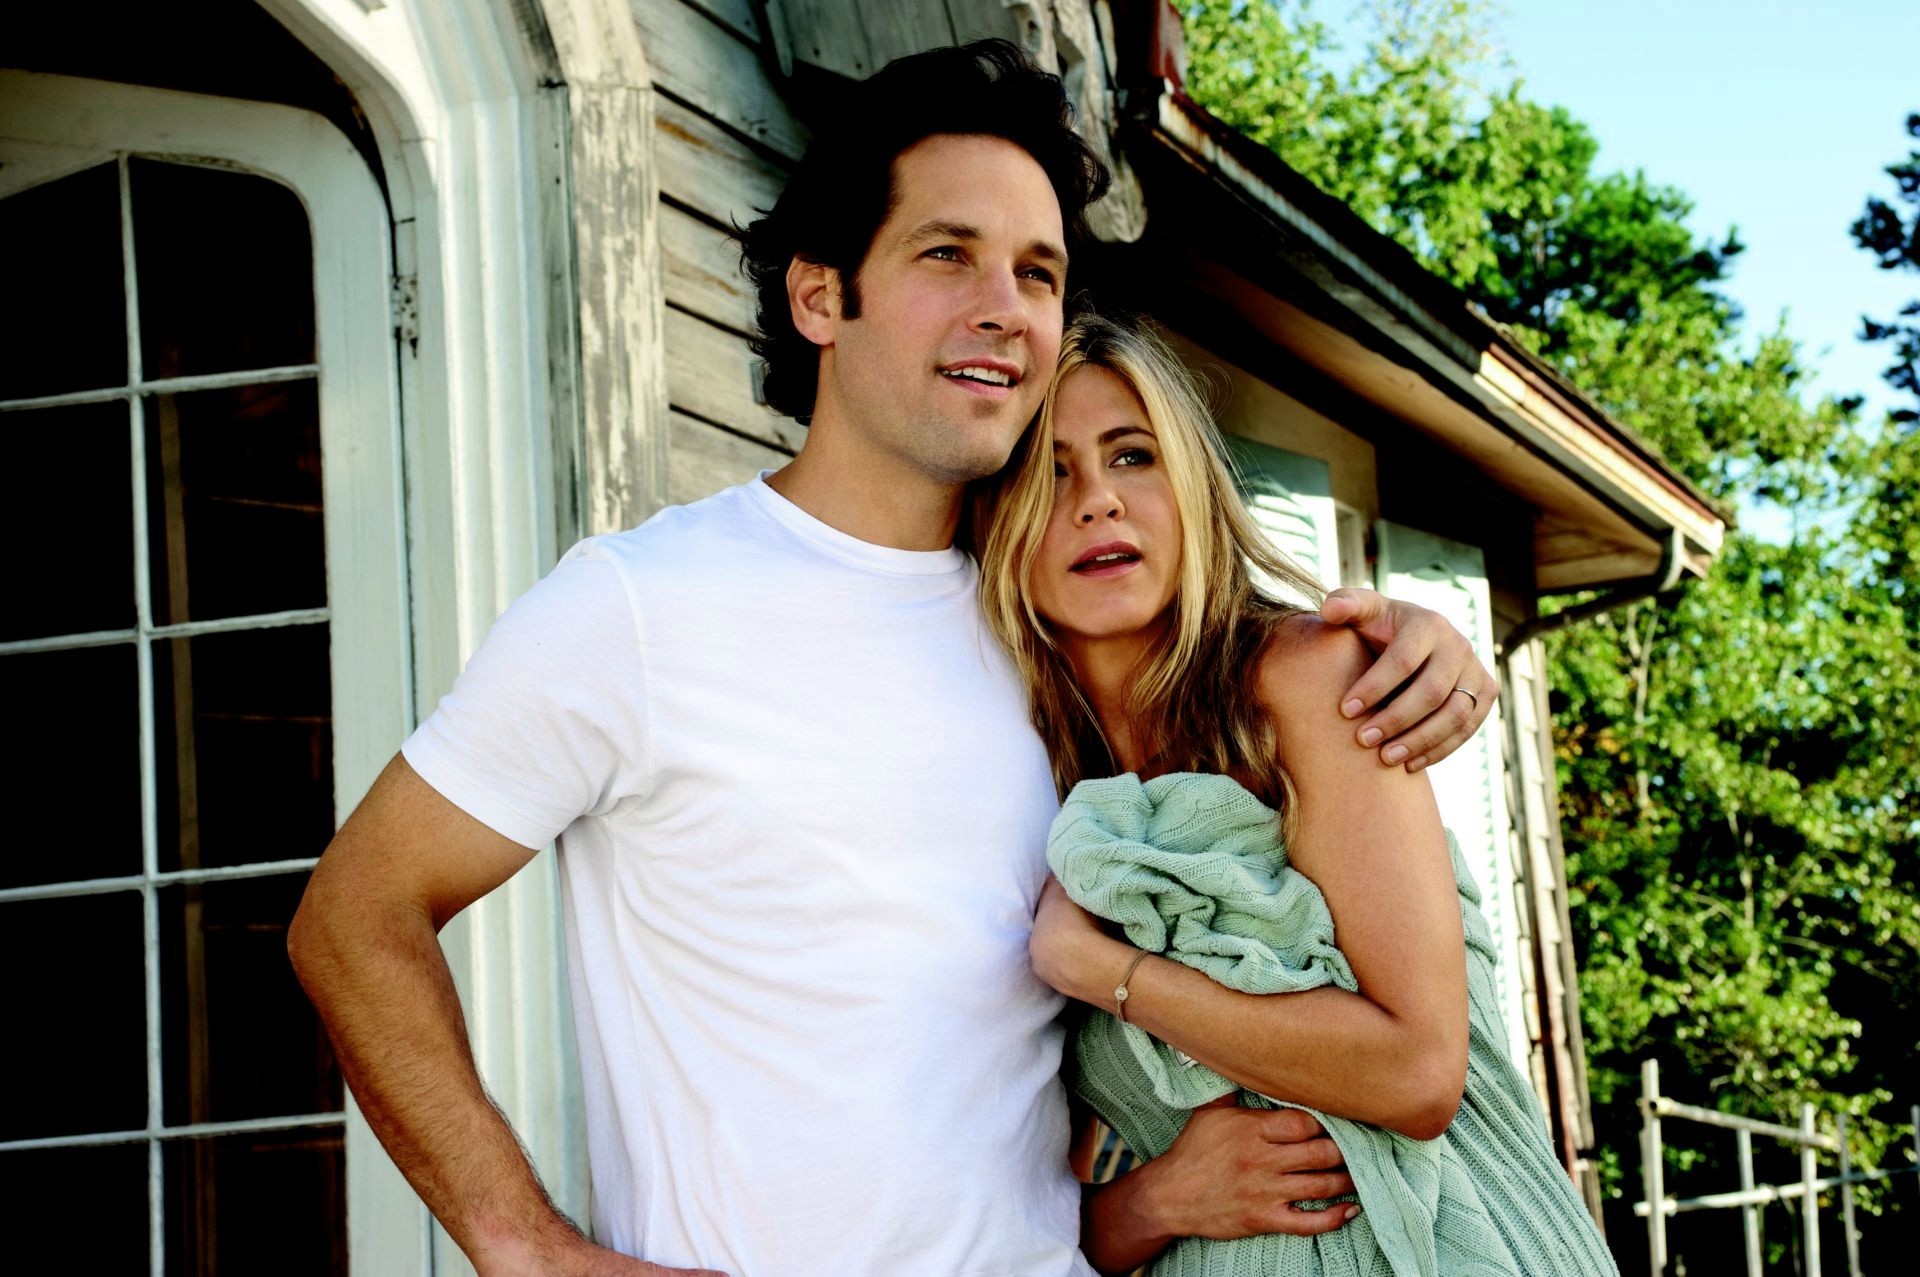 Paul Rudd stars as George and Jennifer Aniston stars as Linda in Universal Pictures' Wanderlust (2012). Photo credit by Gemma La Mana.